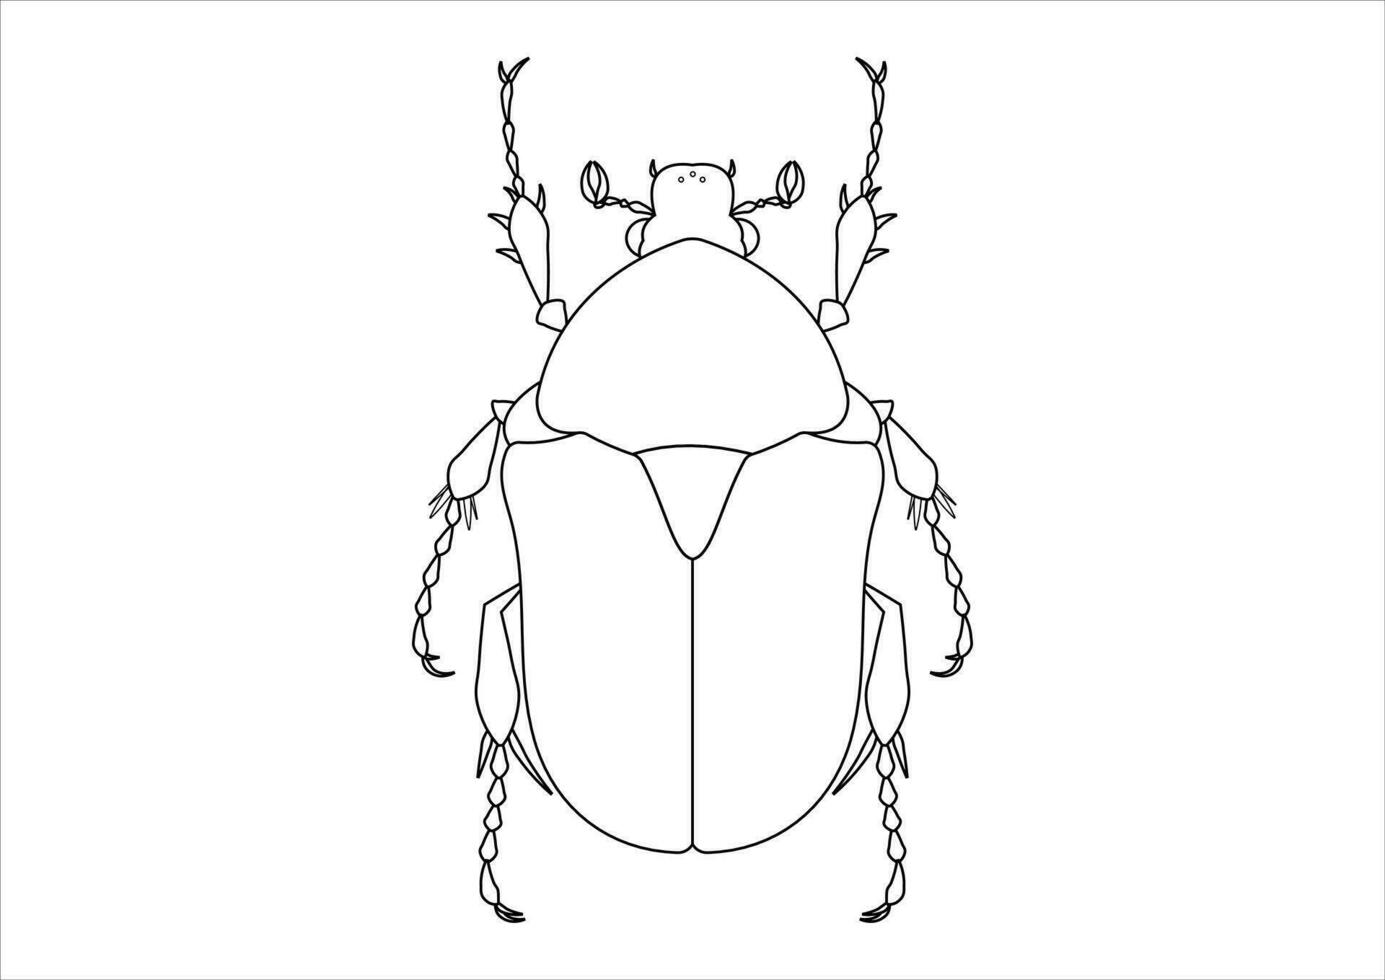 Black and White Protaetia Beetle Clipart. Coloring Page of a Protaetia Beetle vector